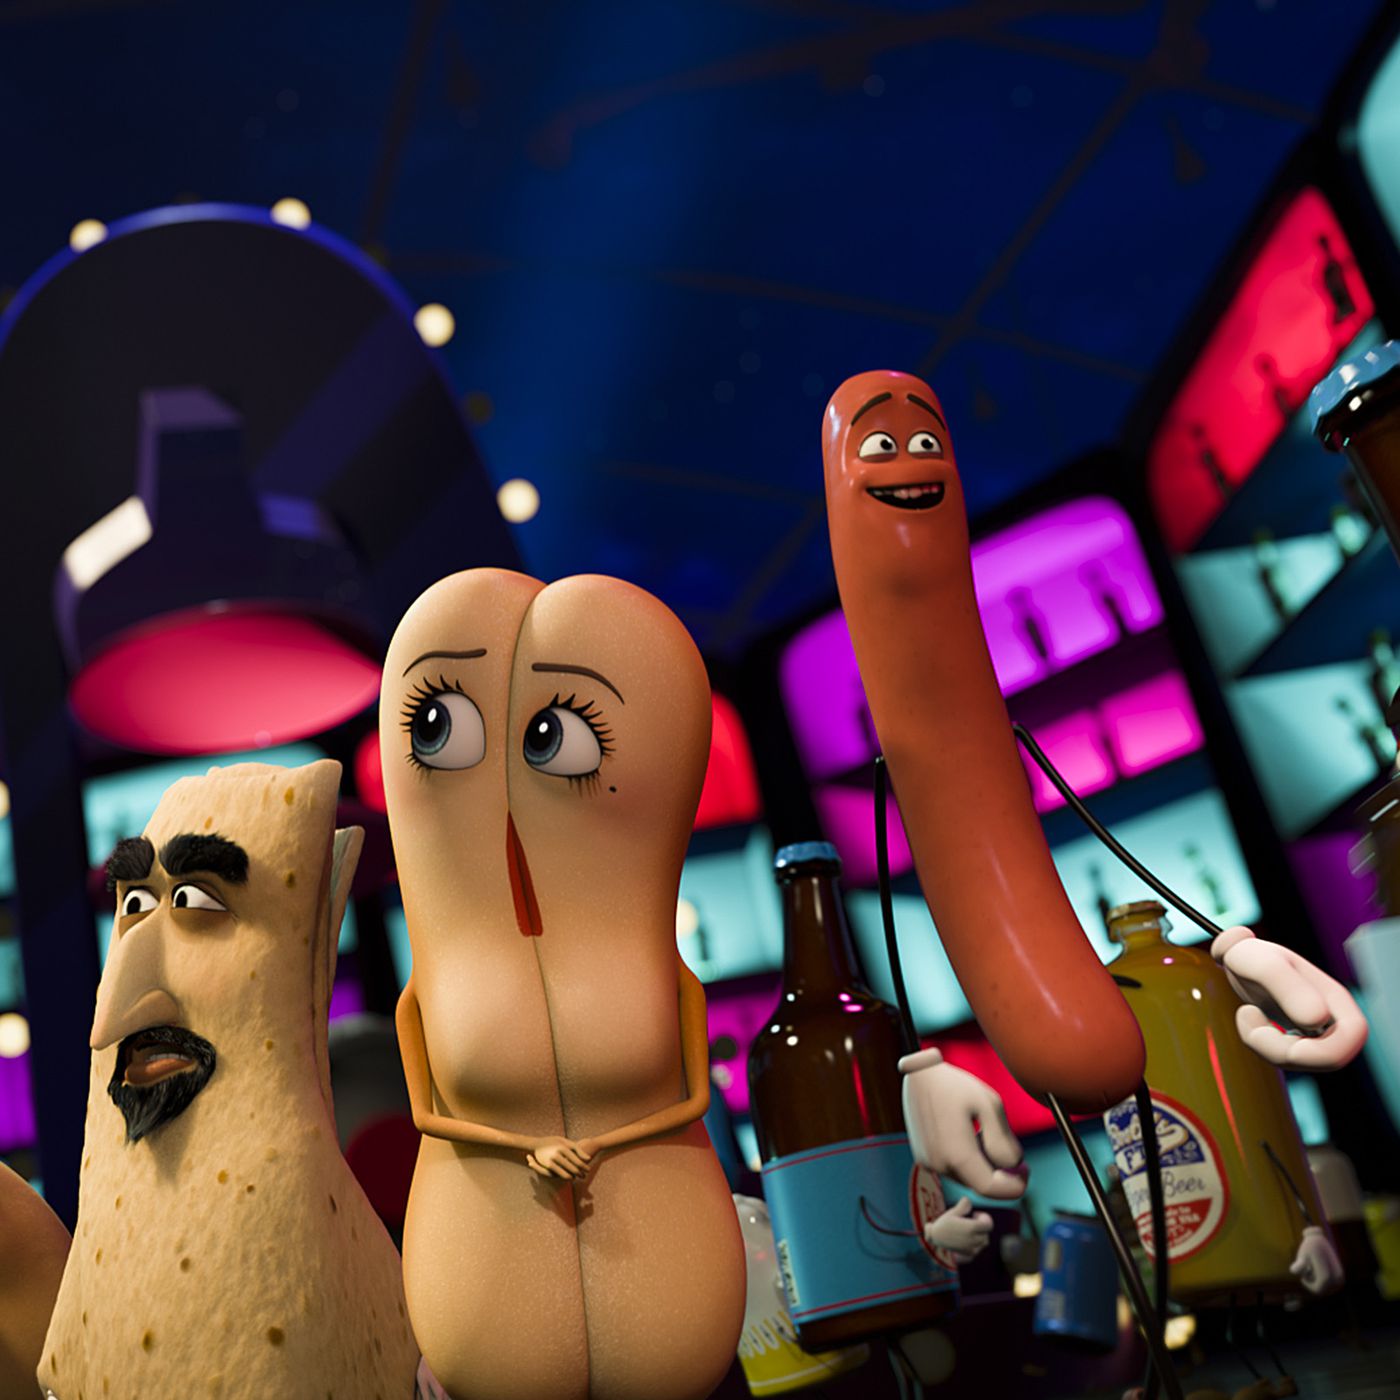 alan dillaway recommends sausage party movie orgy scene pic